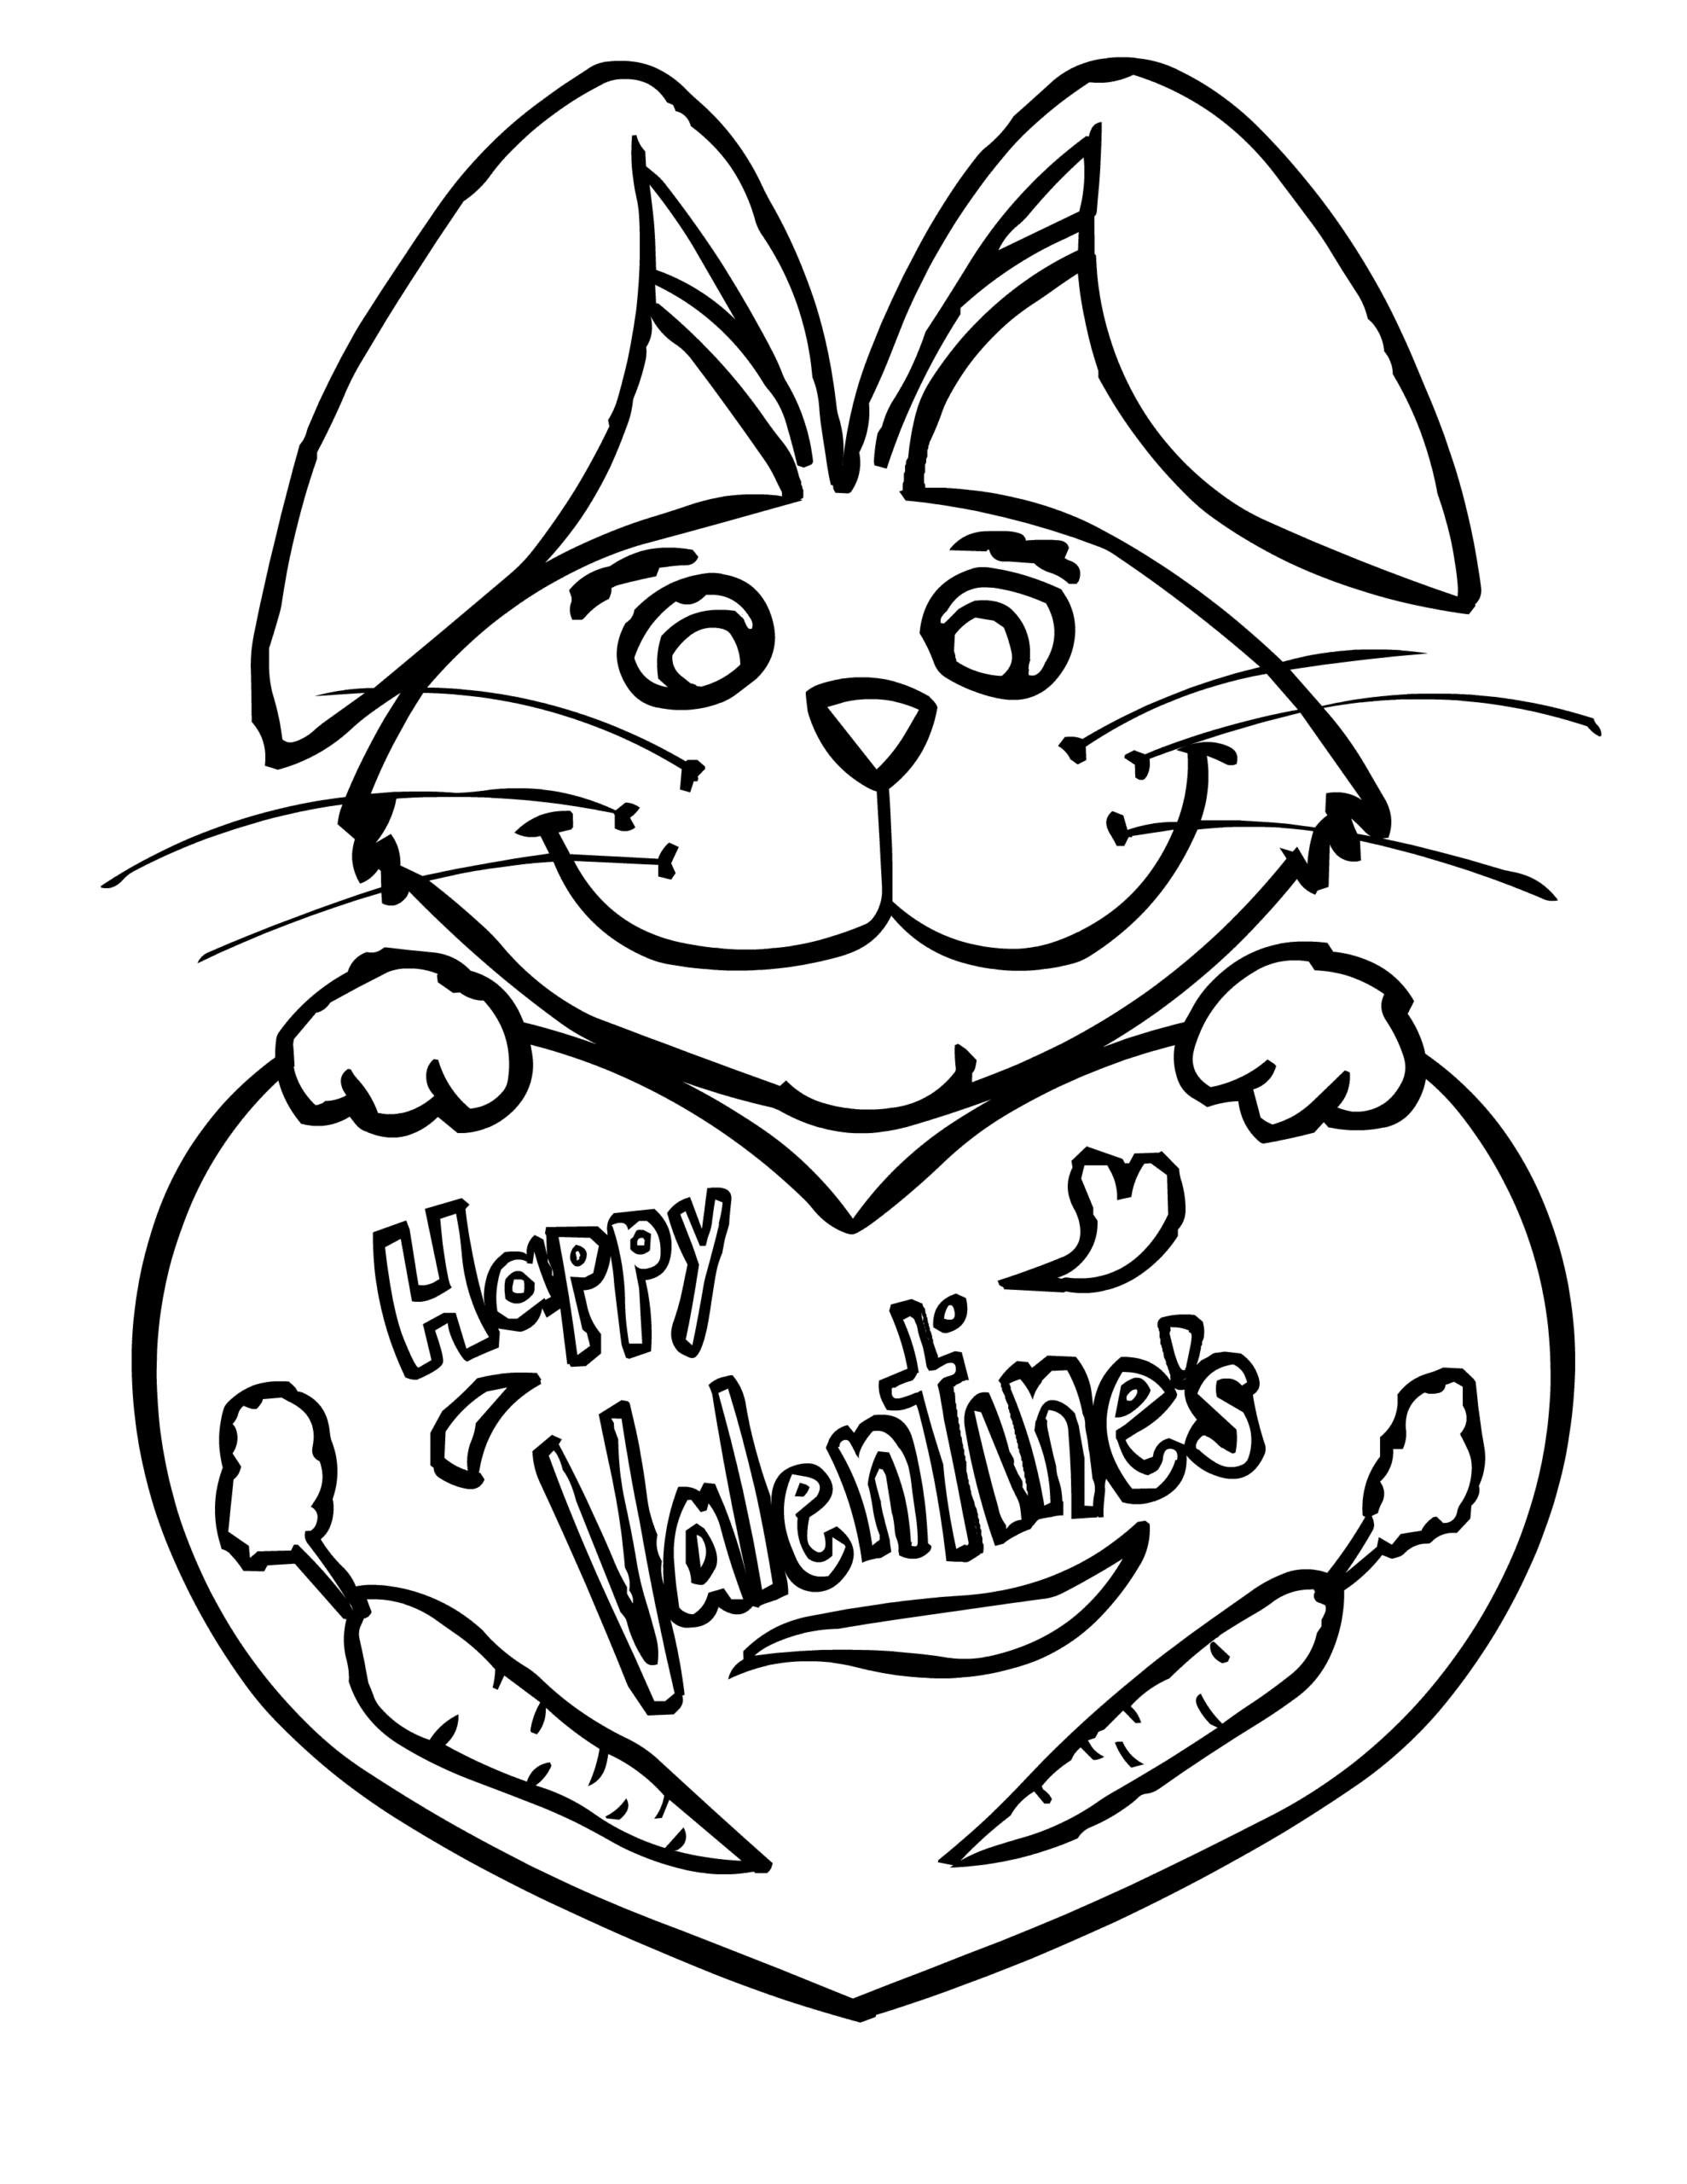 Valentines Day Coloring Pages Holiday Free Valentine For Kids Printable 2021 0964 Coloring4free